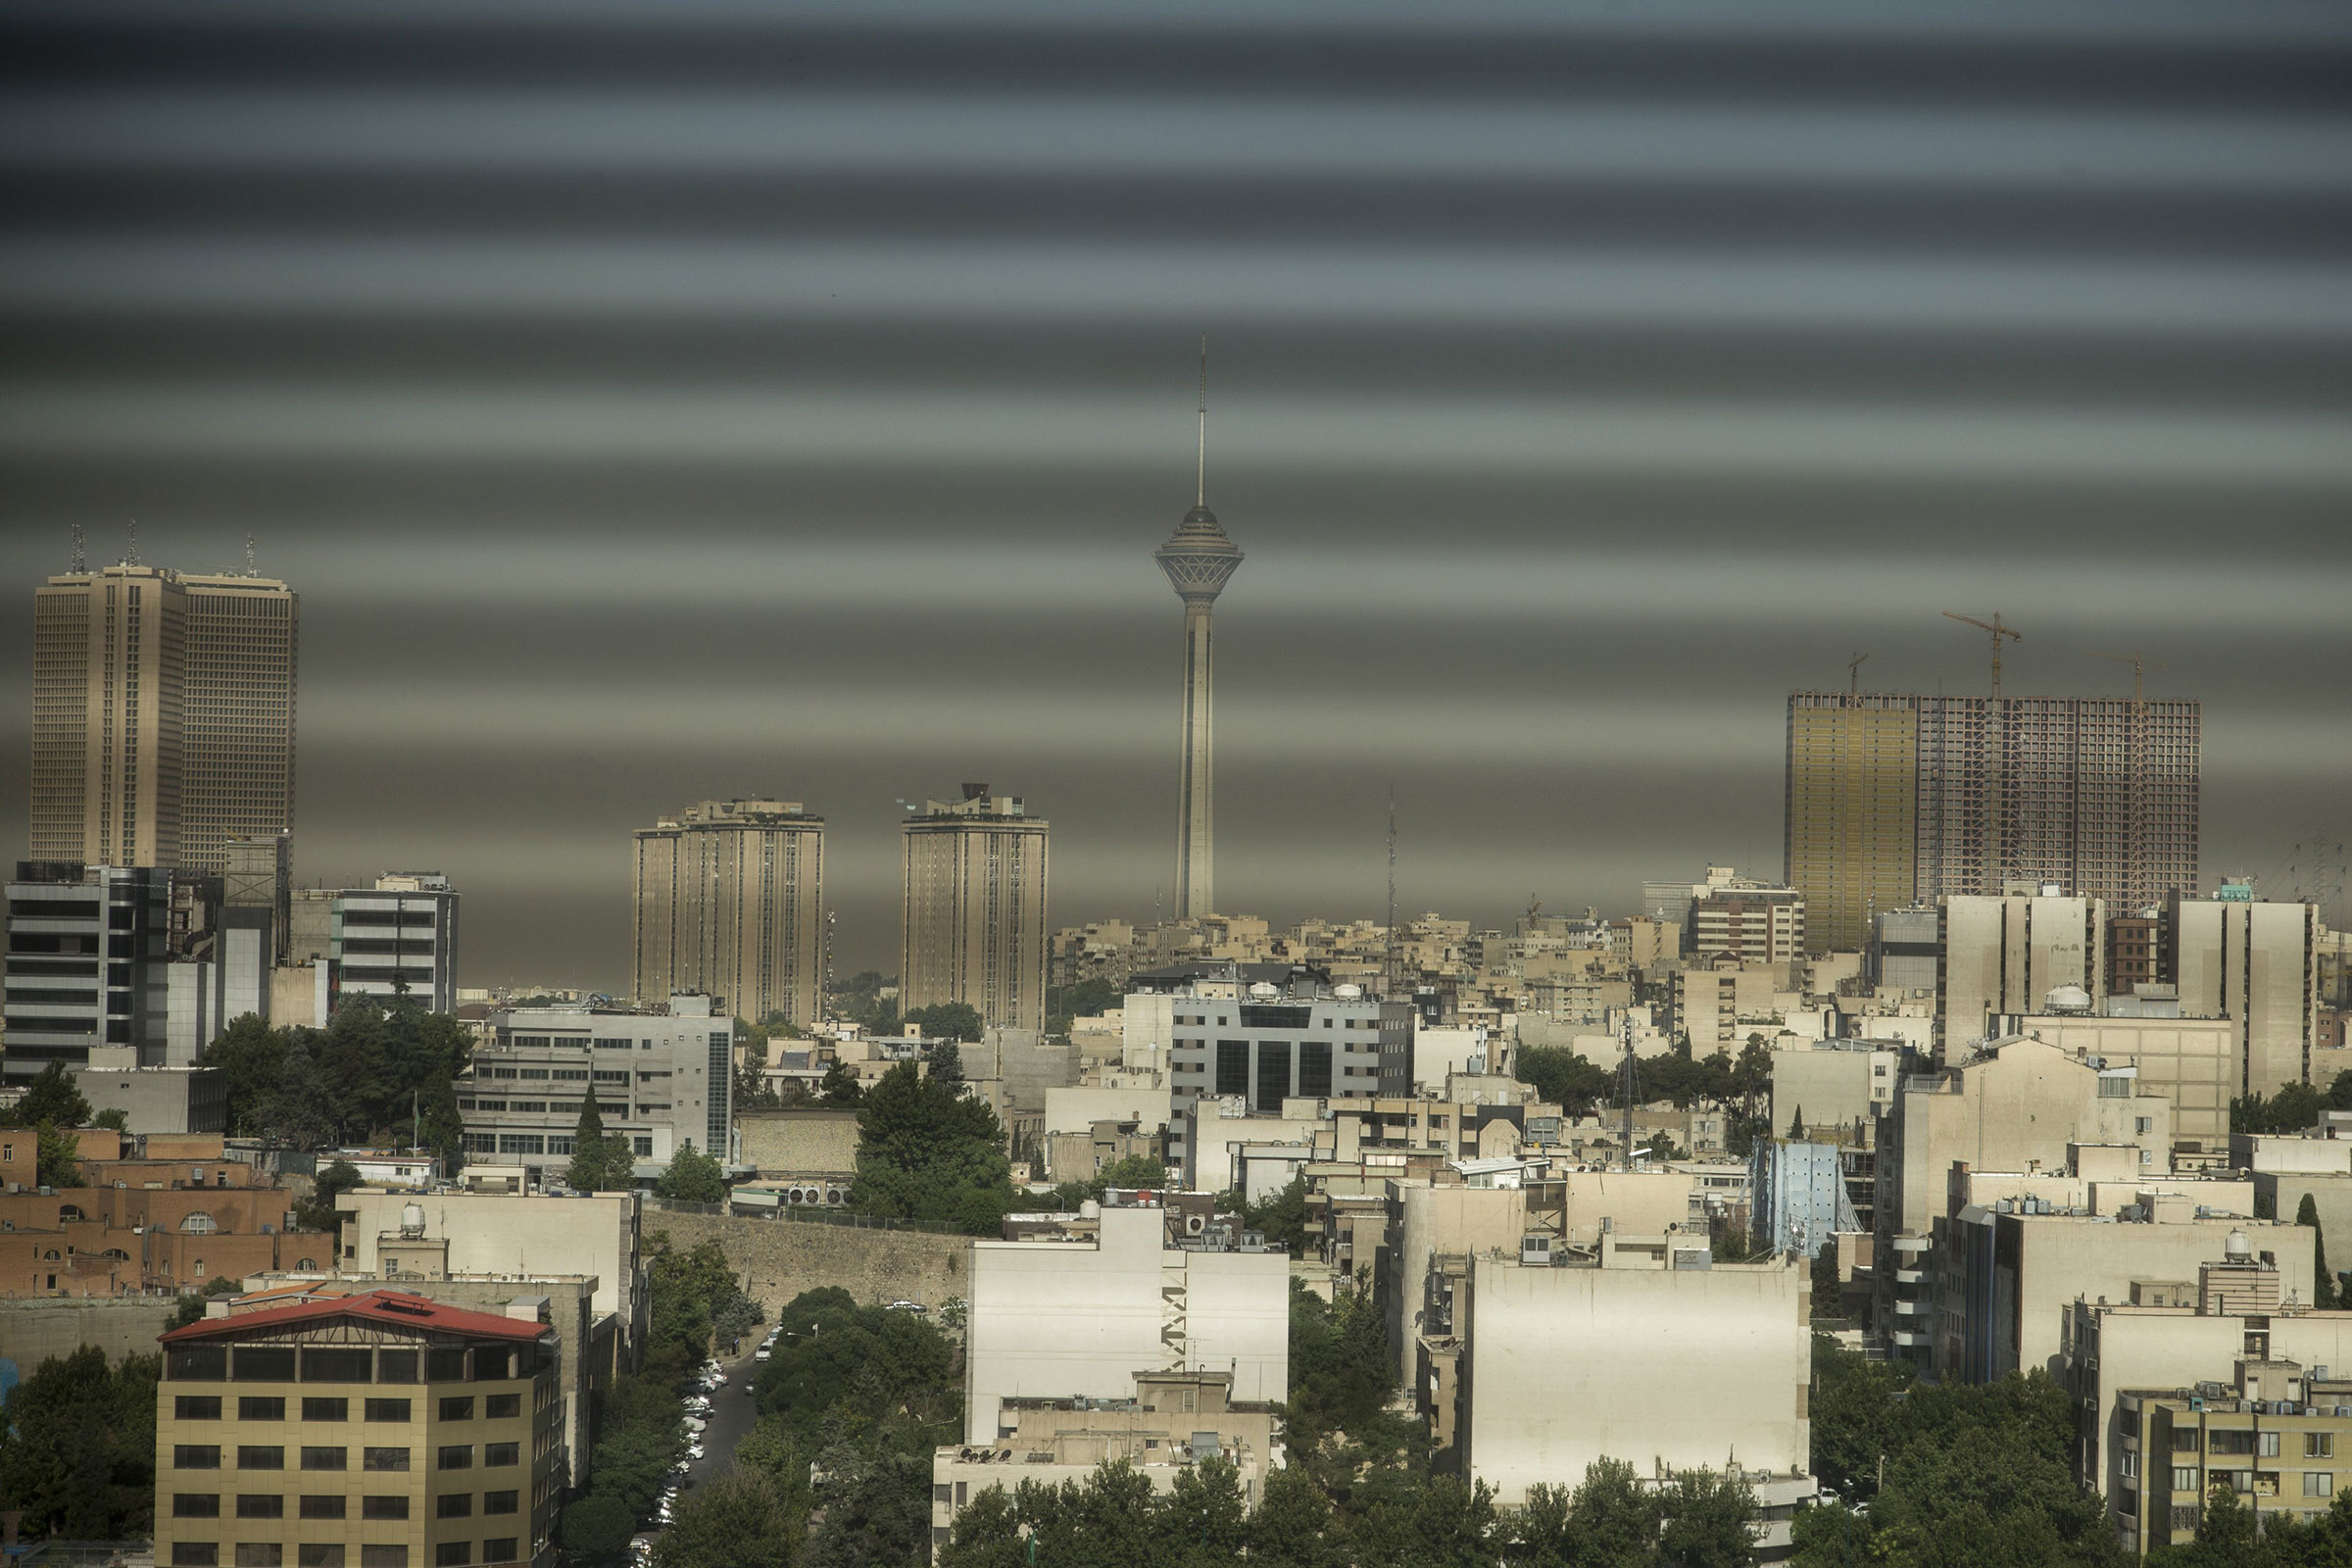 For Tehran, tensions with the U.S. have played into the decision to mobilize for a digital battlefield. (Rouzbeh Fouladi—Zuma Wire)